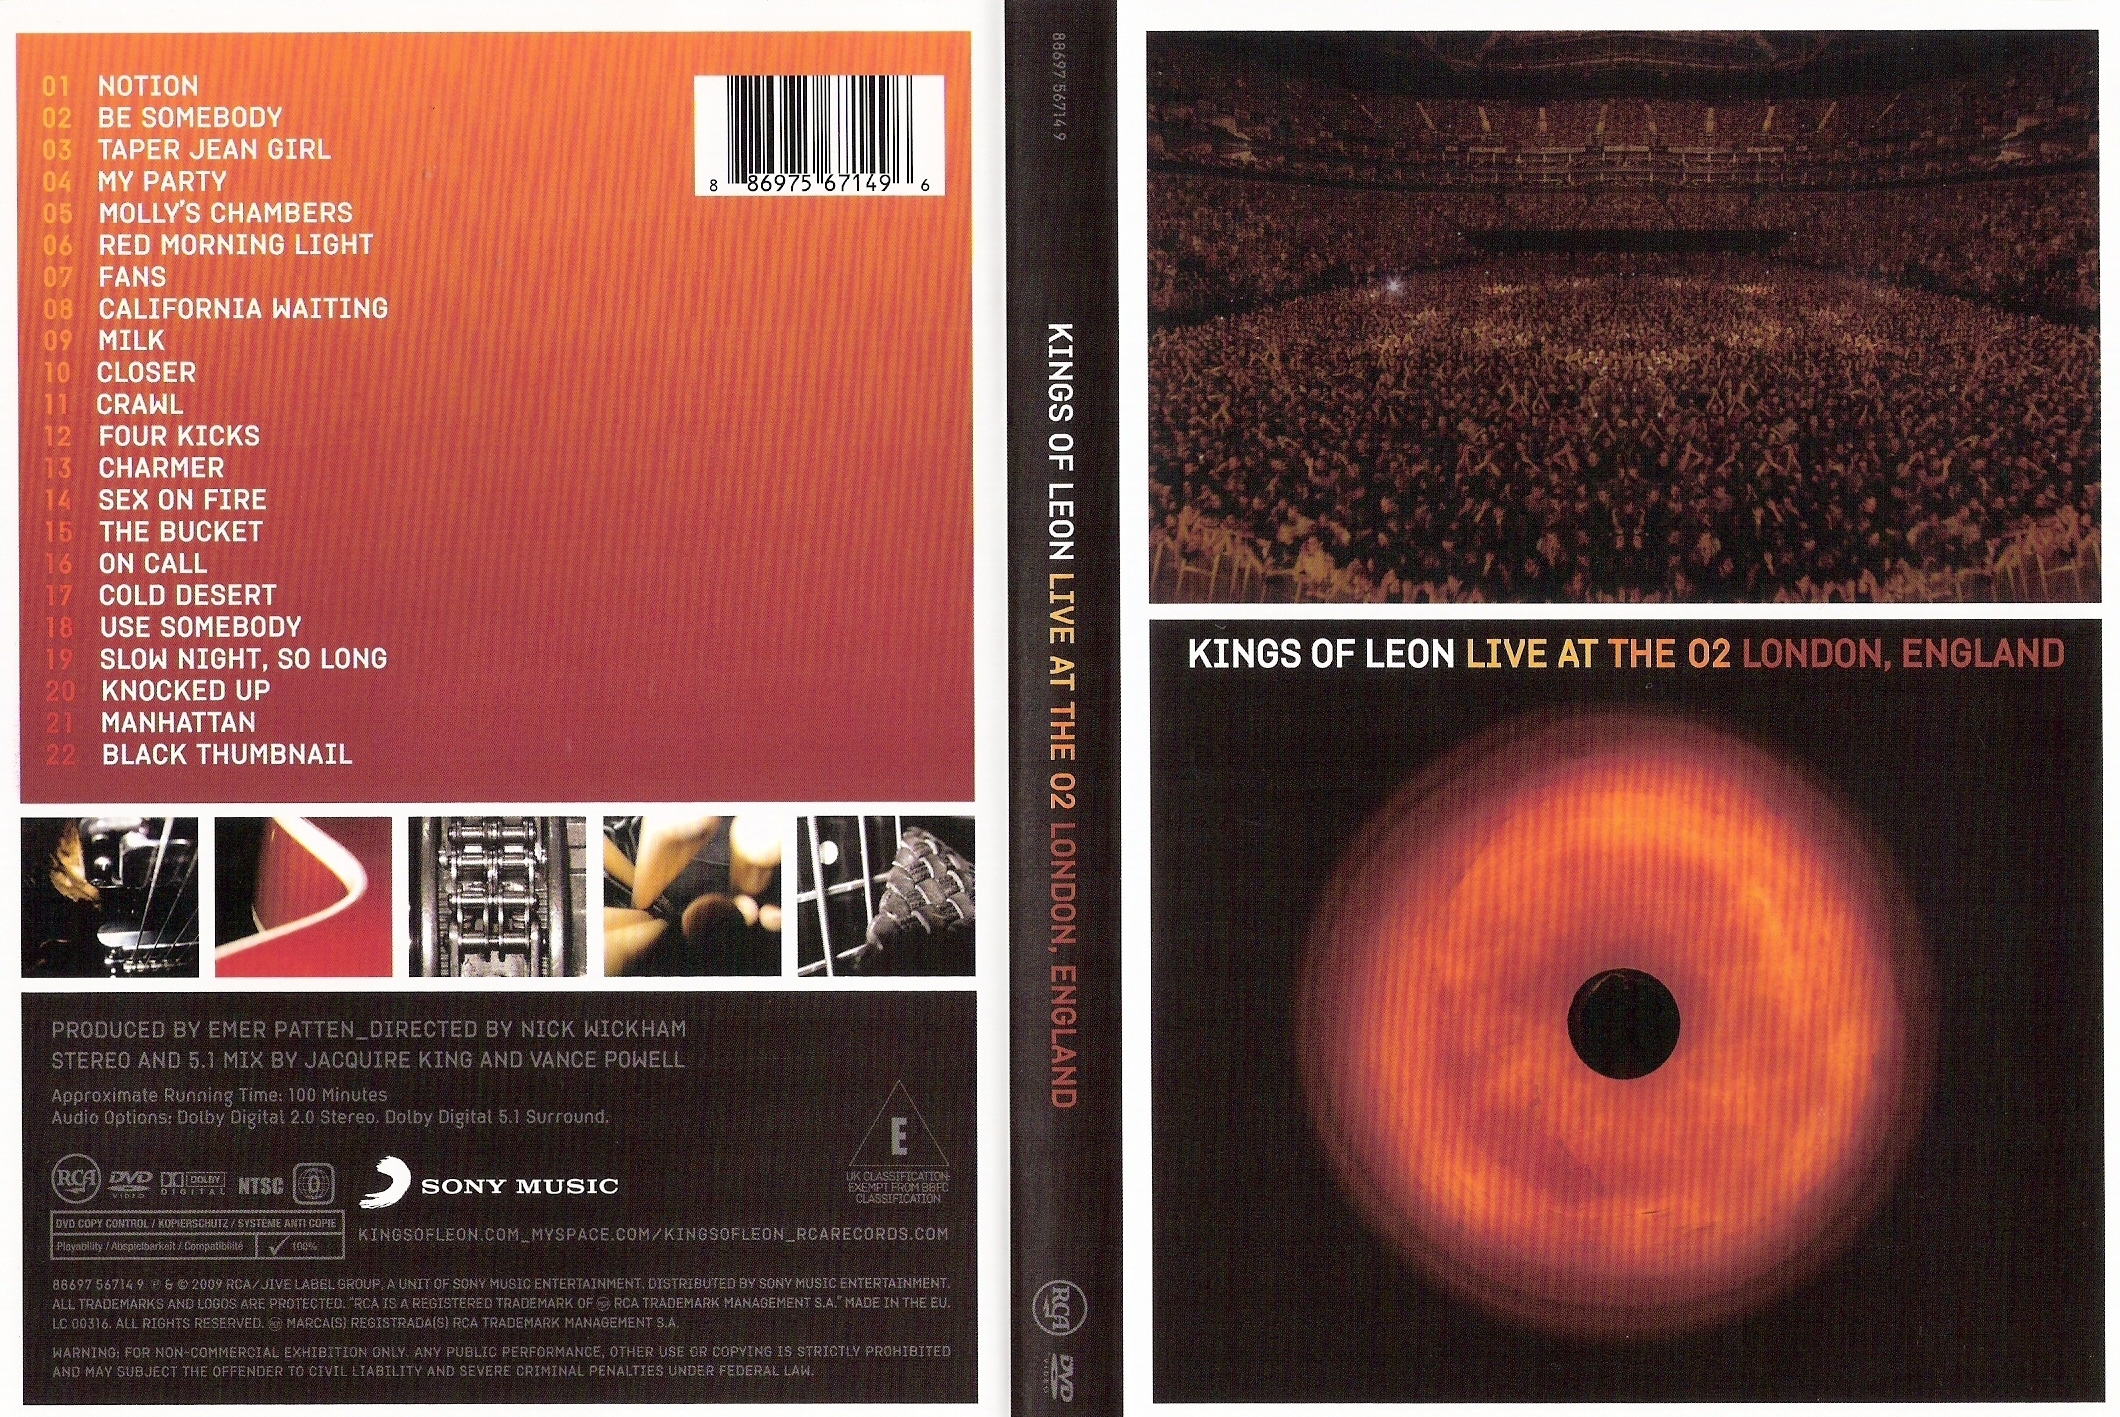 Jaquette DVD Kings of leon - Live a the 02 London